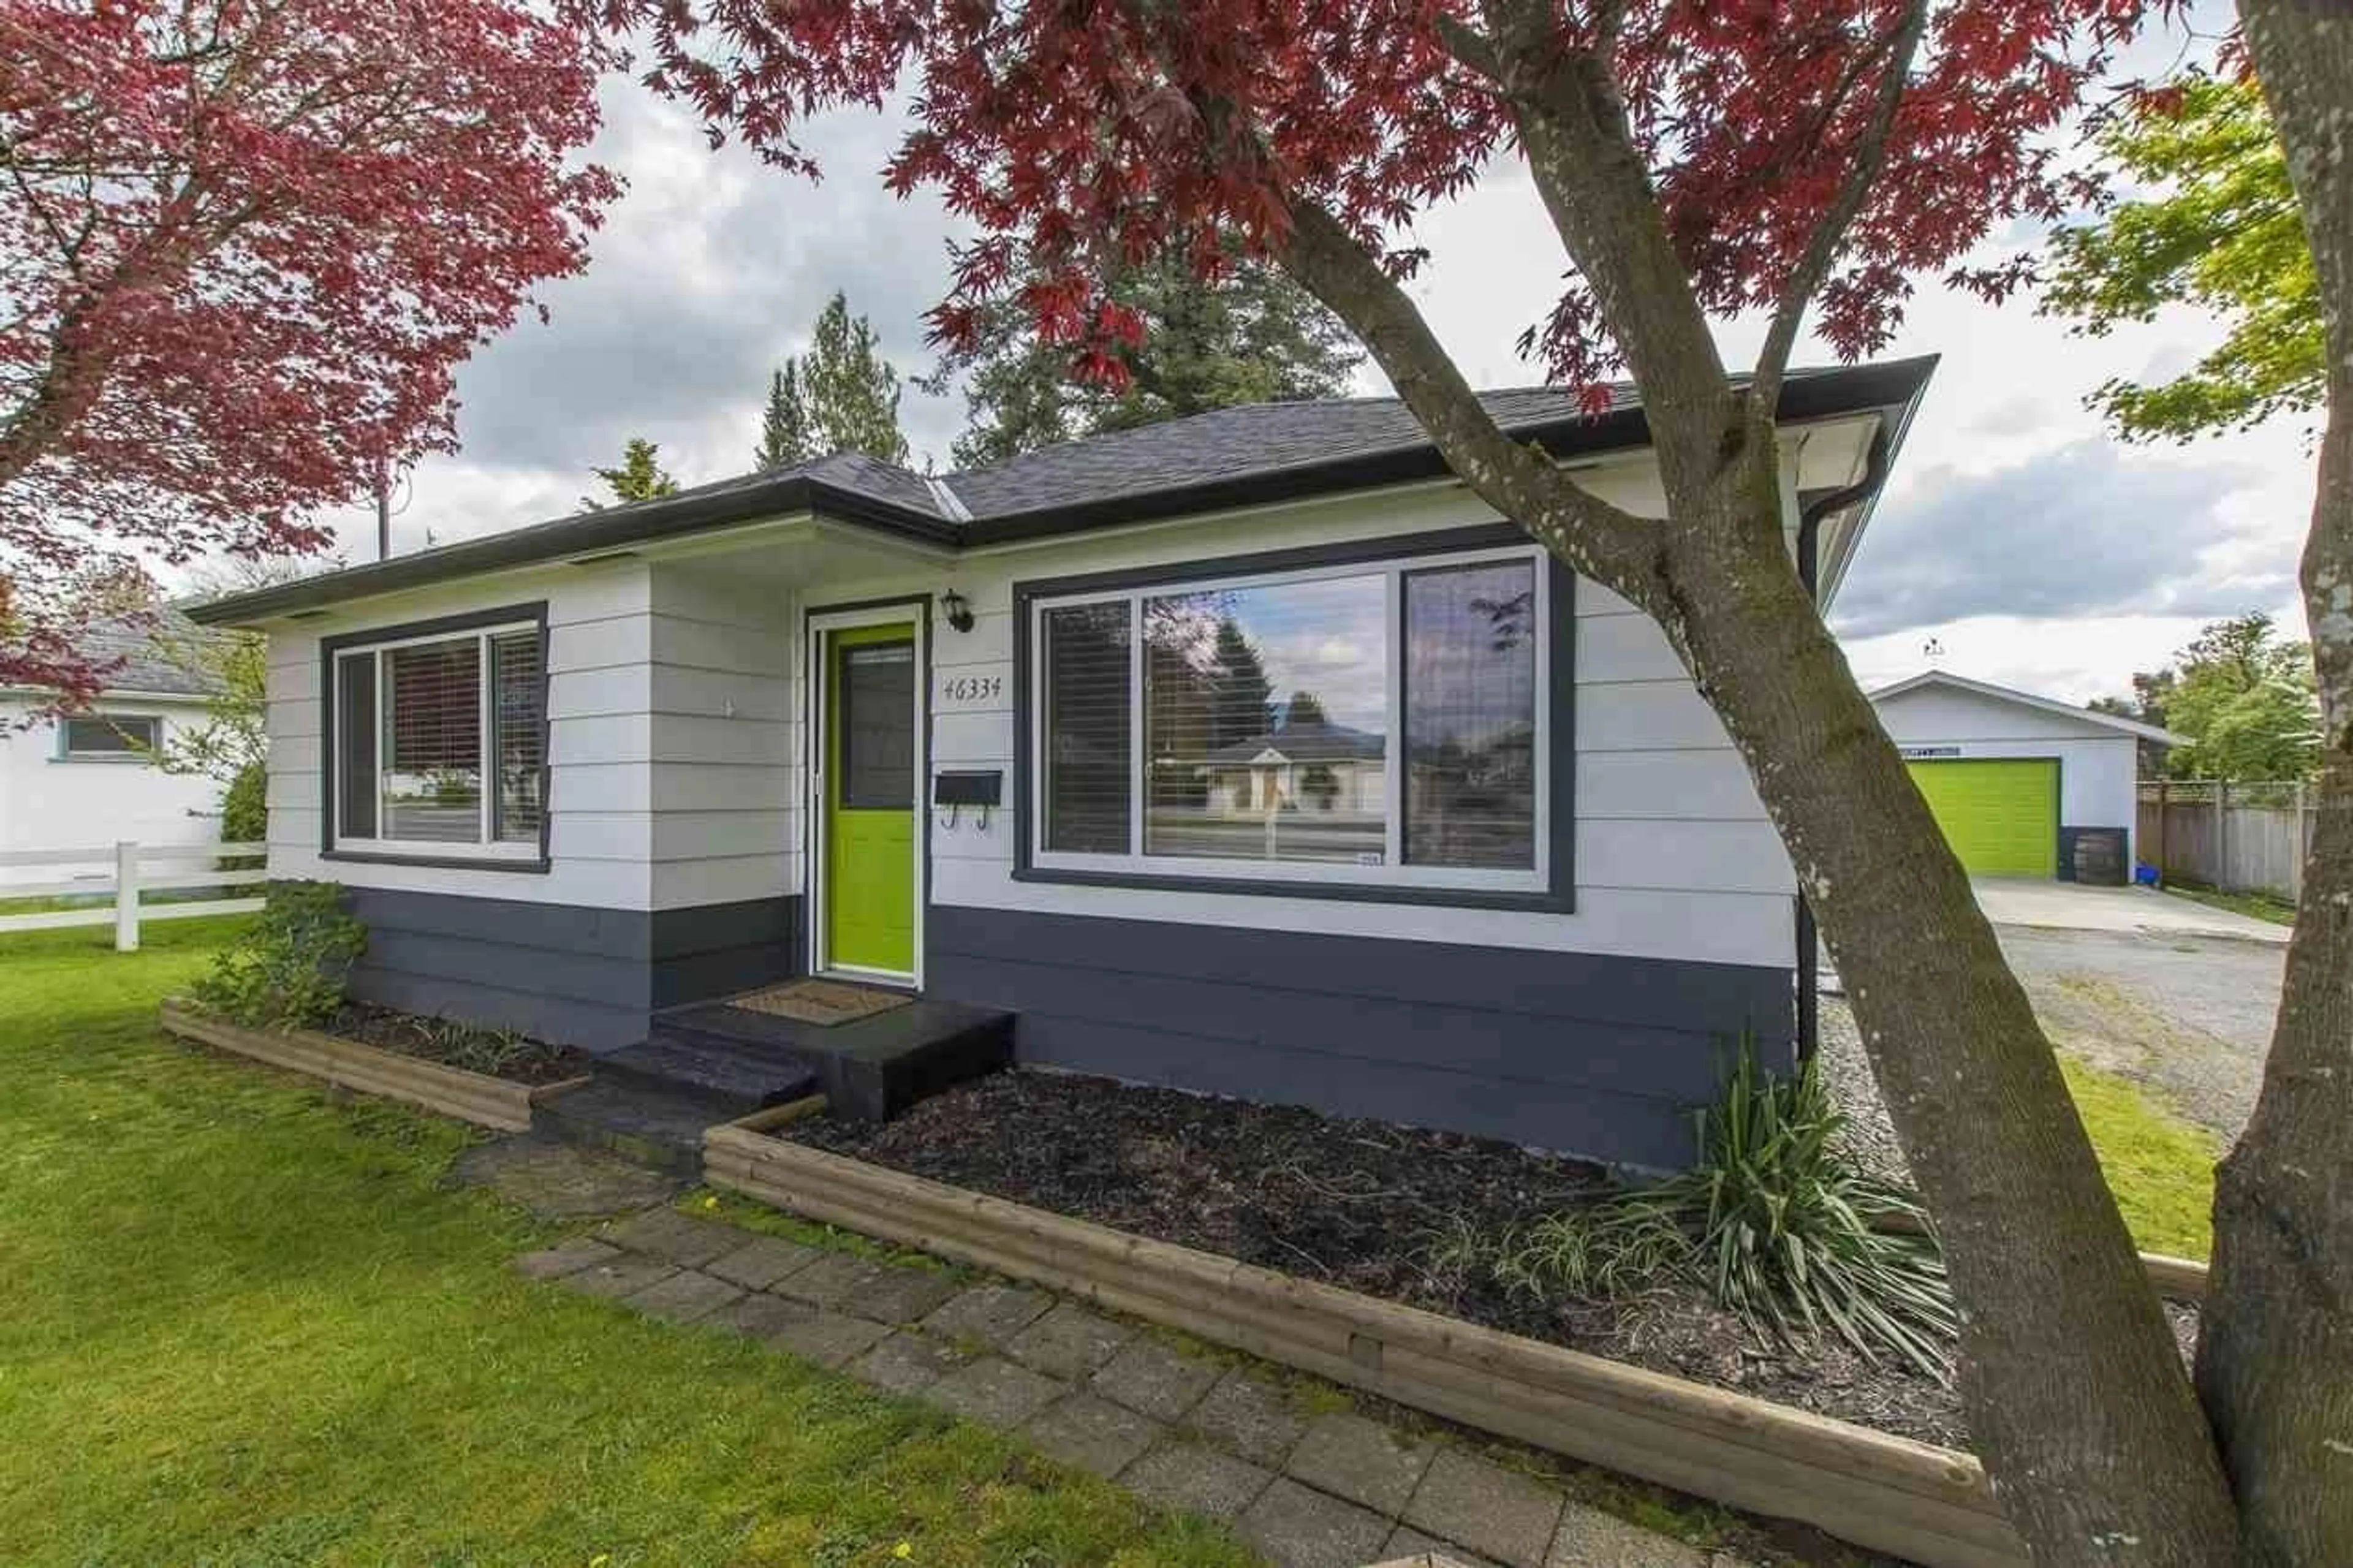 Home with vinyl exterior material for 46334 MAPLE AVENUE, Chilliwack British Columbia V2V2J6